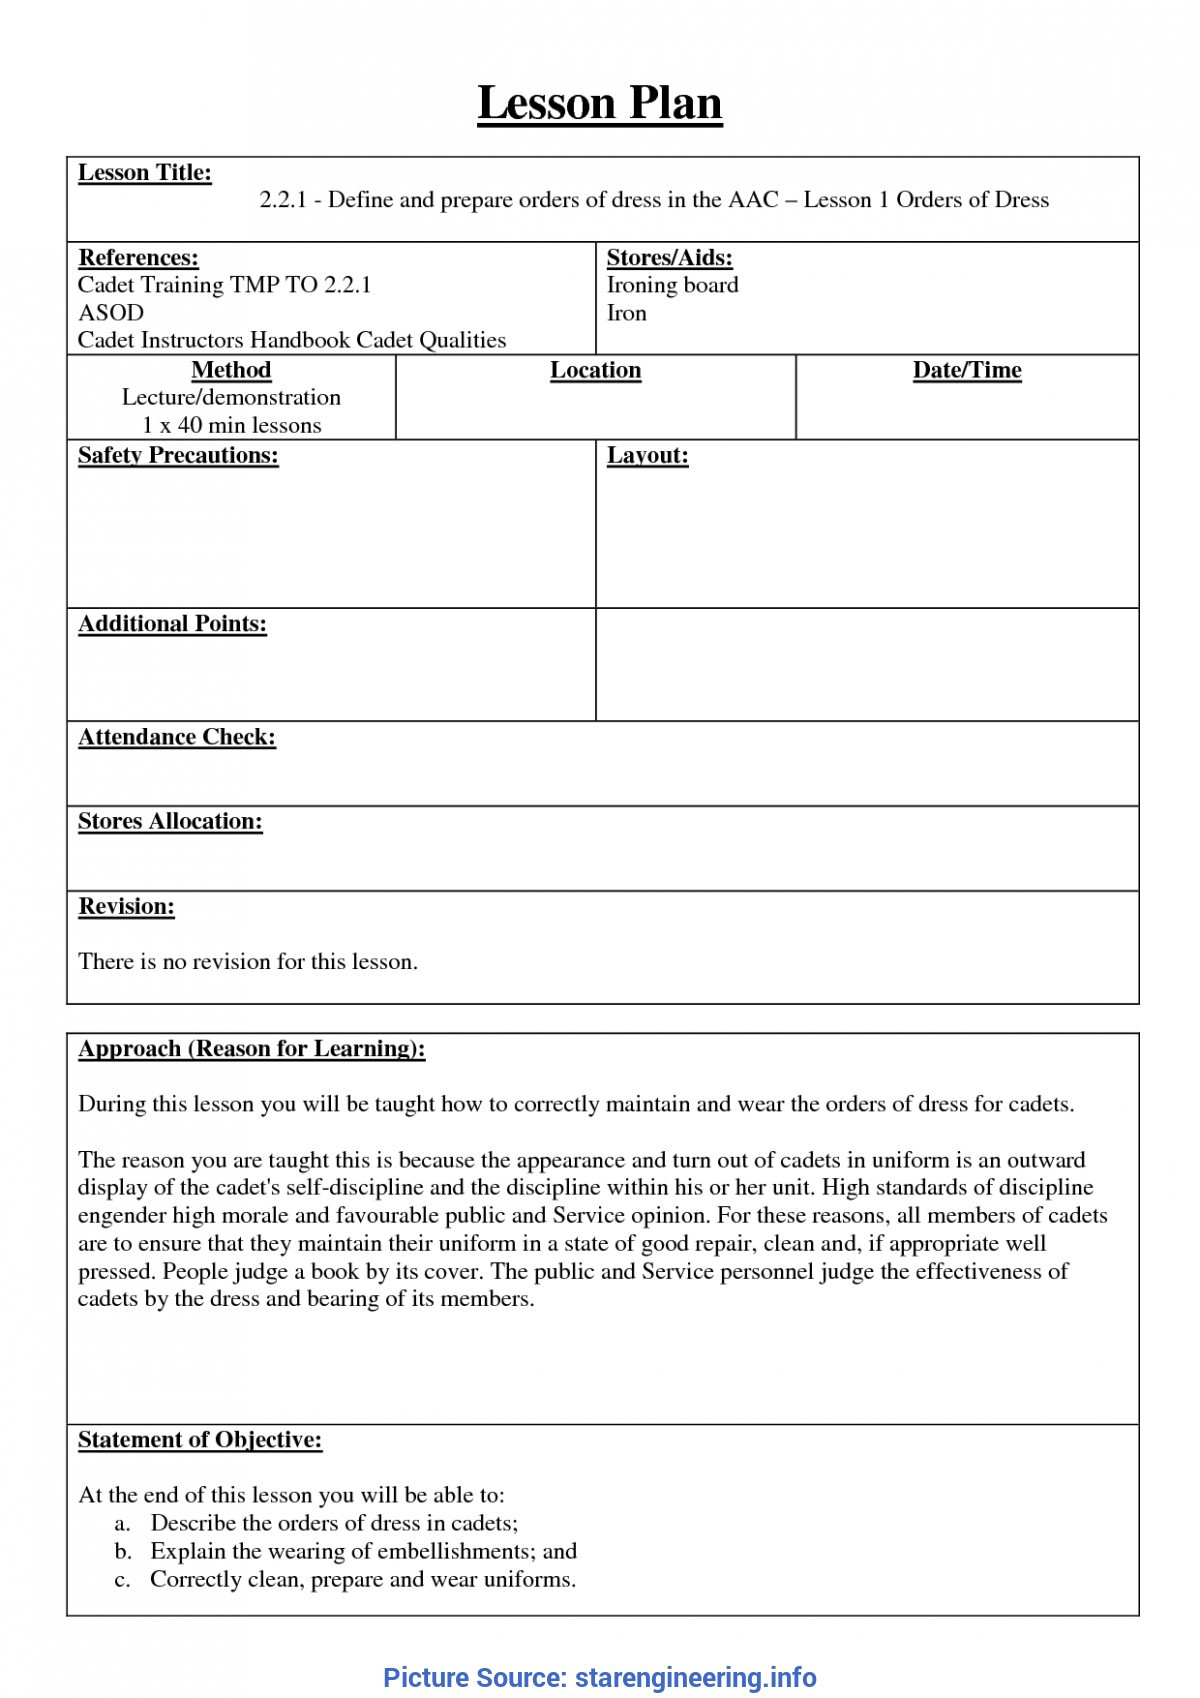 Lesson Plan Template Word Editable Lesson Plan Template Nsw Ten Fantastic Vacation Ideas for